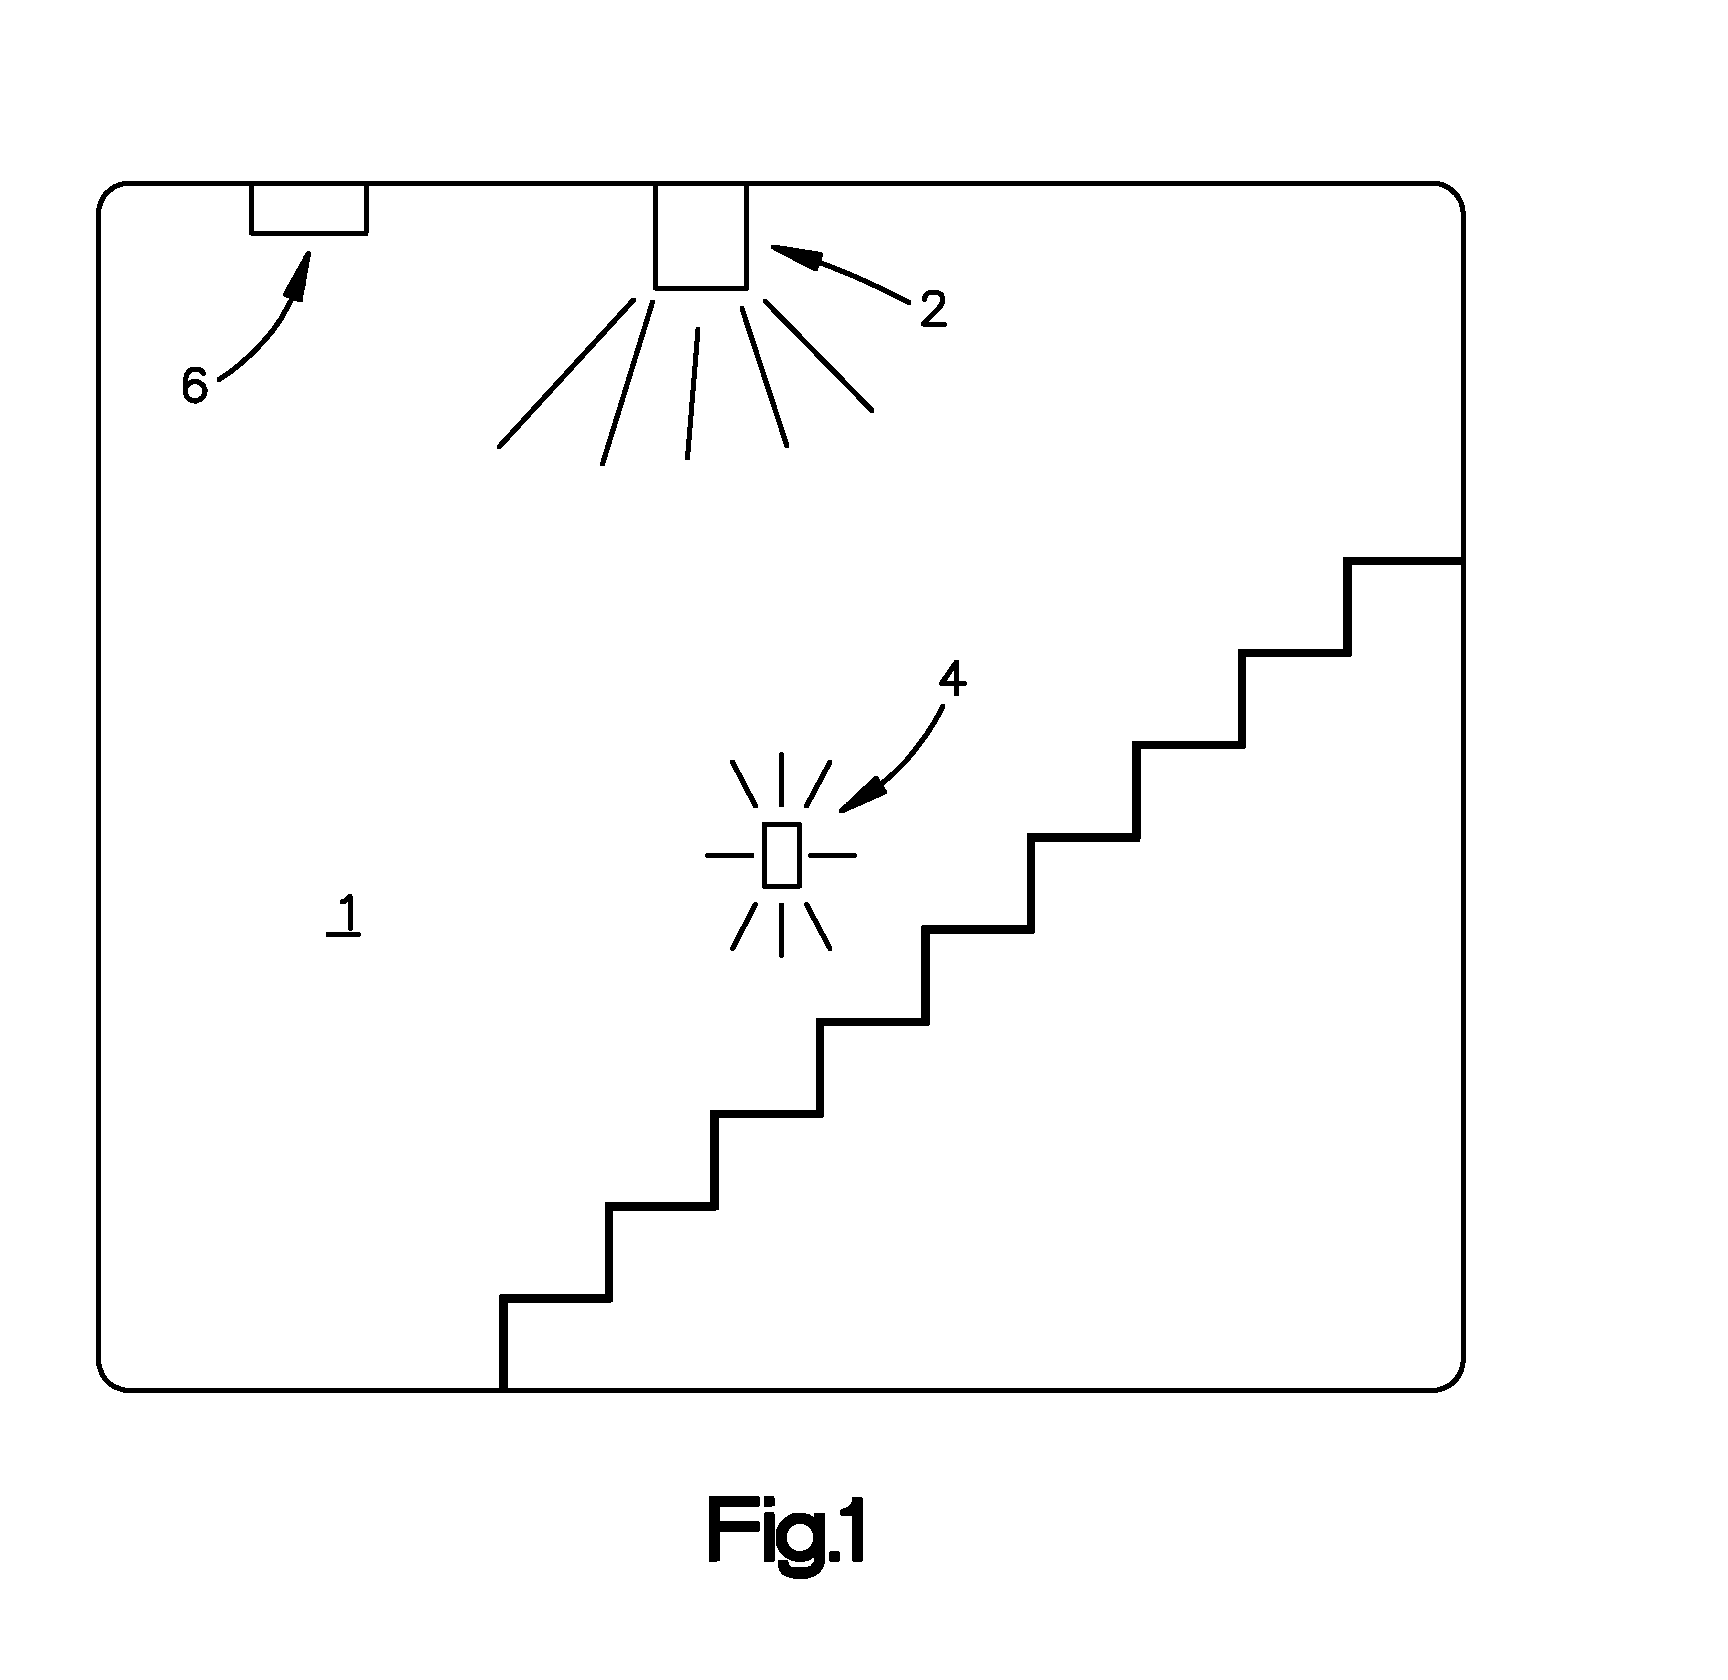 System and method for occupancy sensing with enhanced functionality